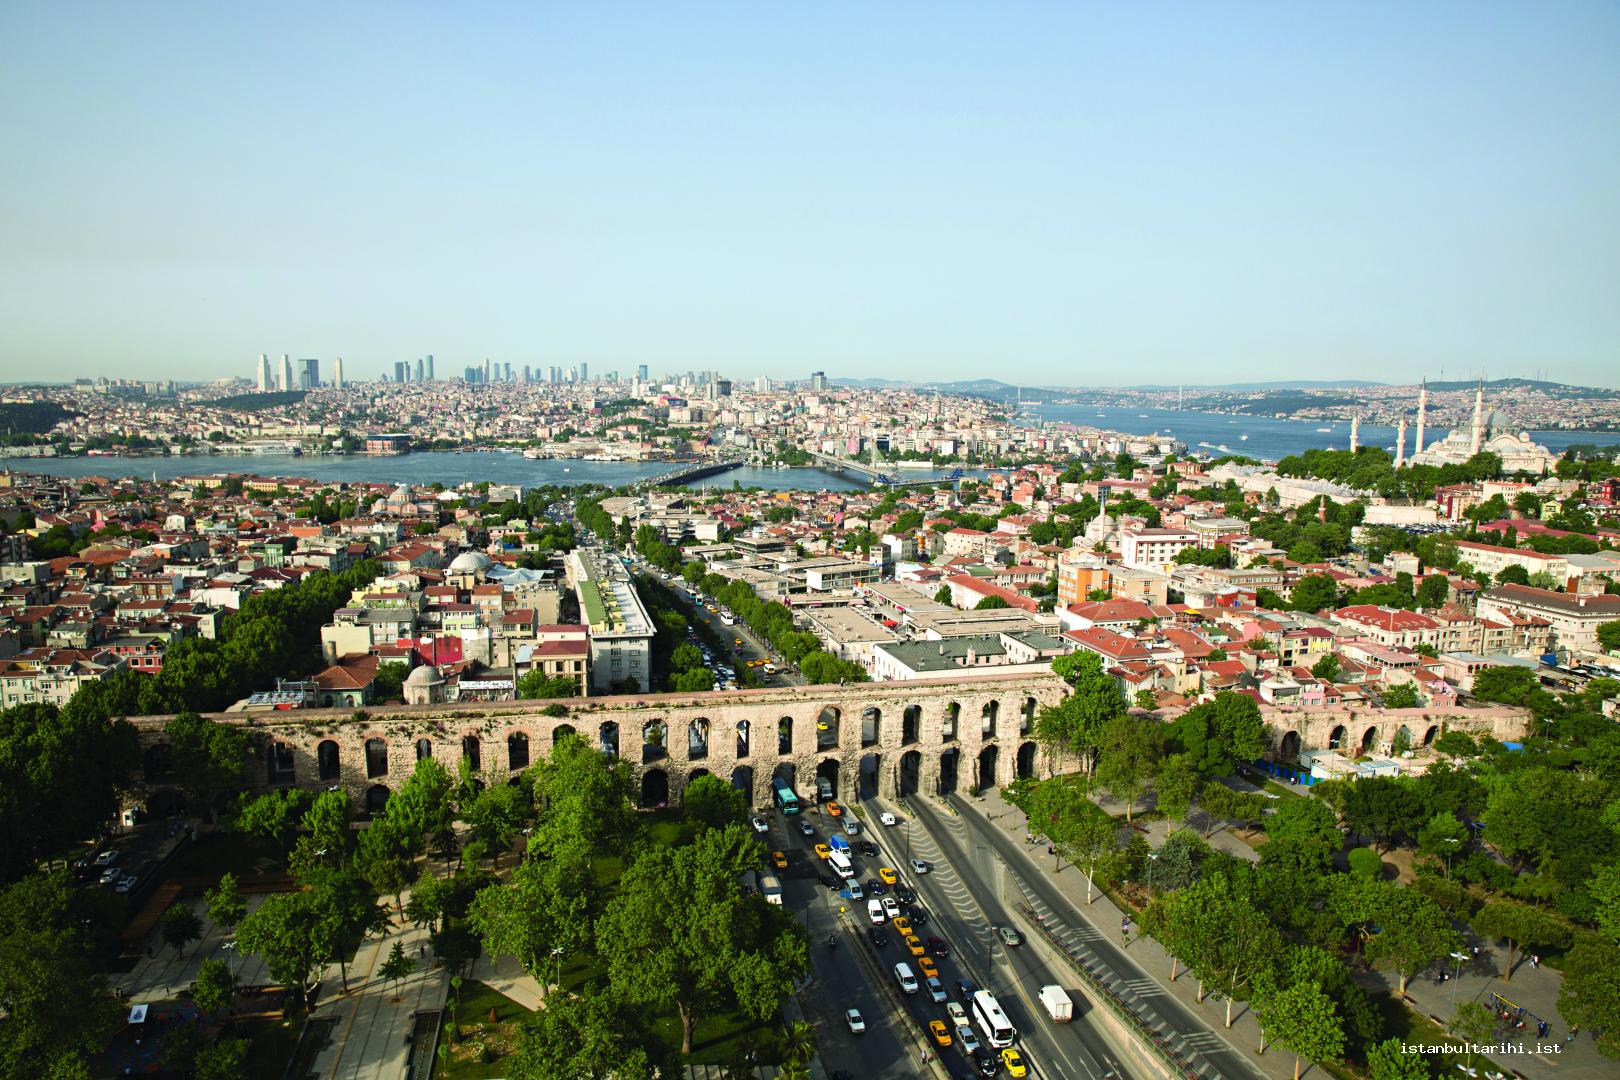 10- Three periods of the city (Byzantium, Ottoman and Turkish Republic) and the architectural monuments from these three periods in one place, Valens (Bozdoğan)
    Aqueduct (on the front), Istanbul Dry-goods Dealers Bazaar and Social Insurance Buildings (on the right and left sides of the street) Süleymaniye complex
    (on the right side), and the raising towers of the city